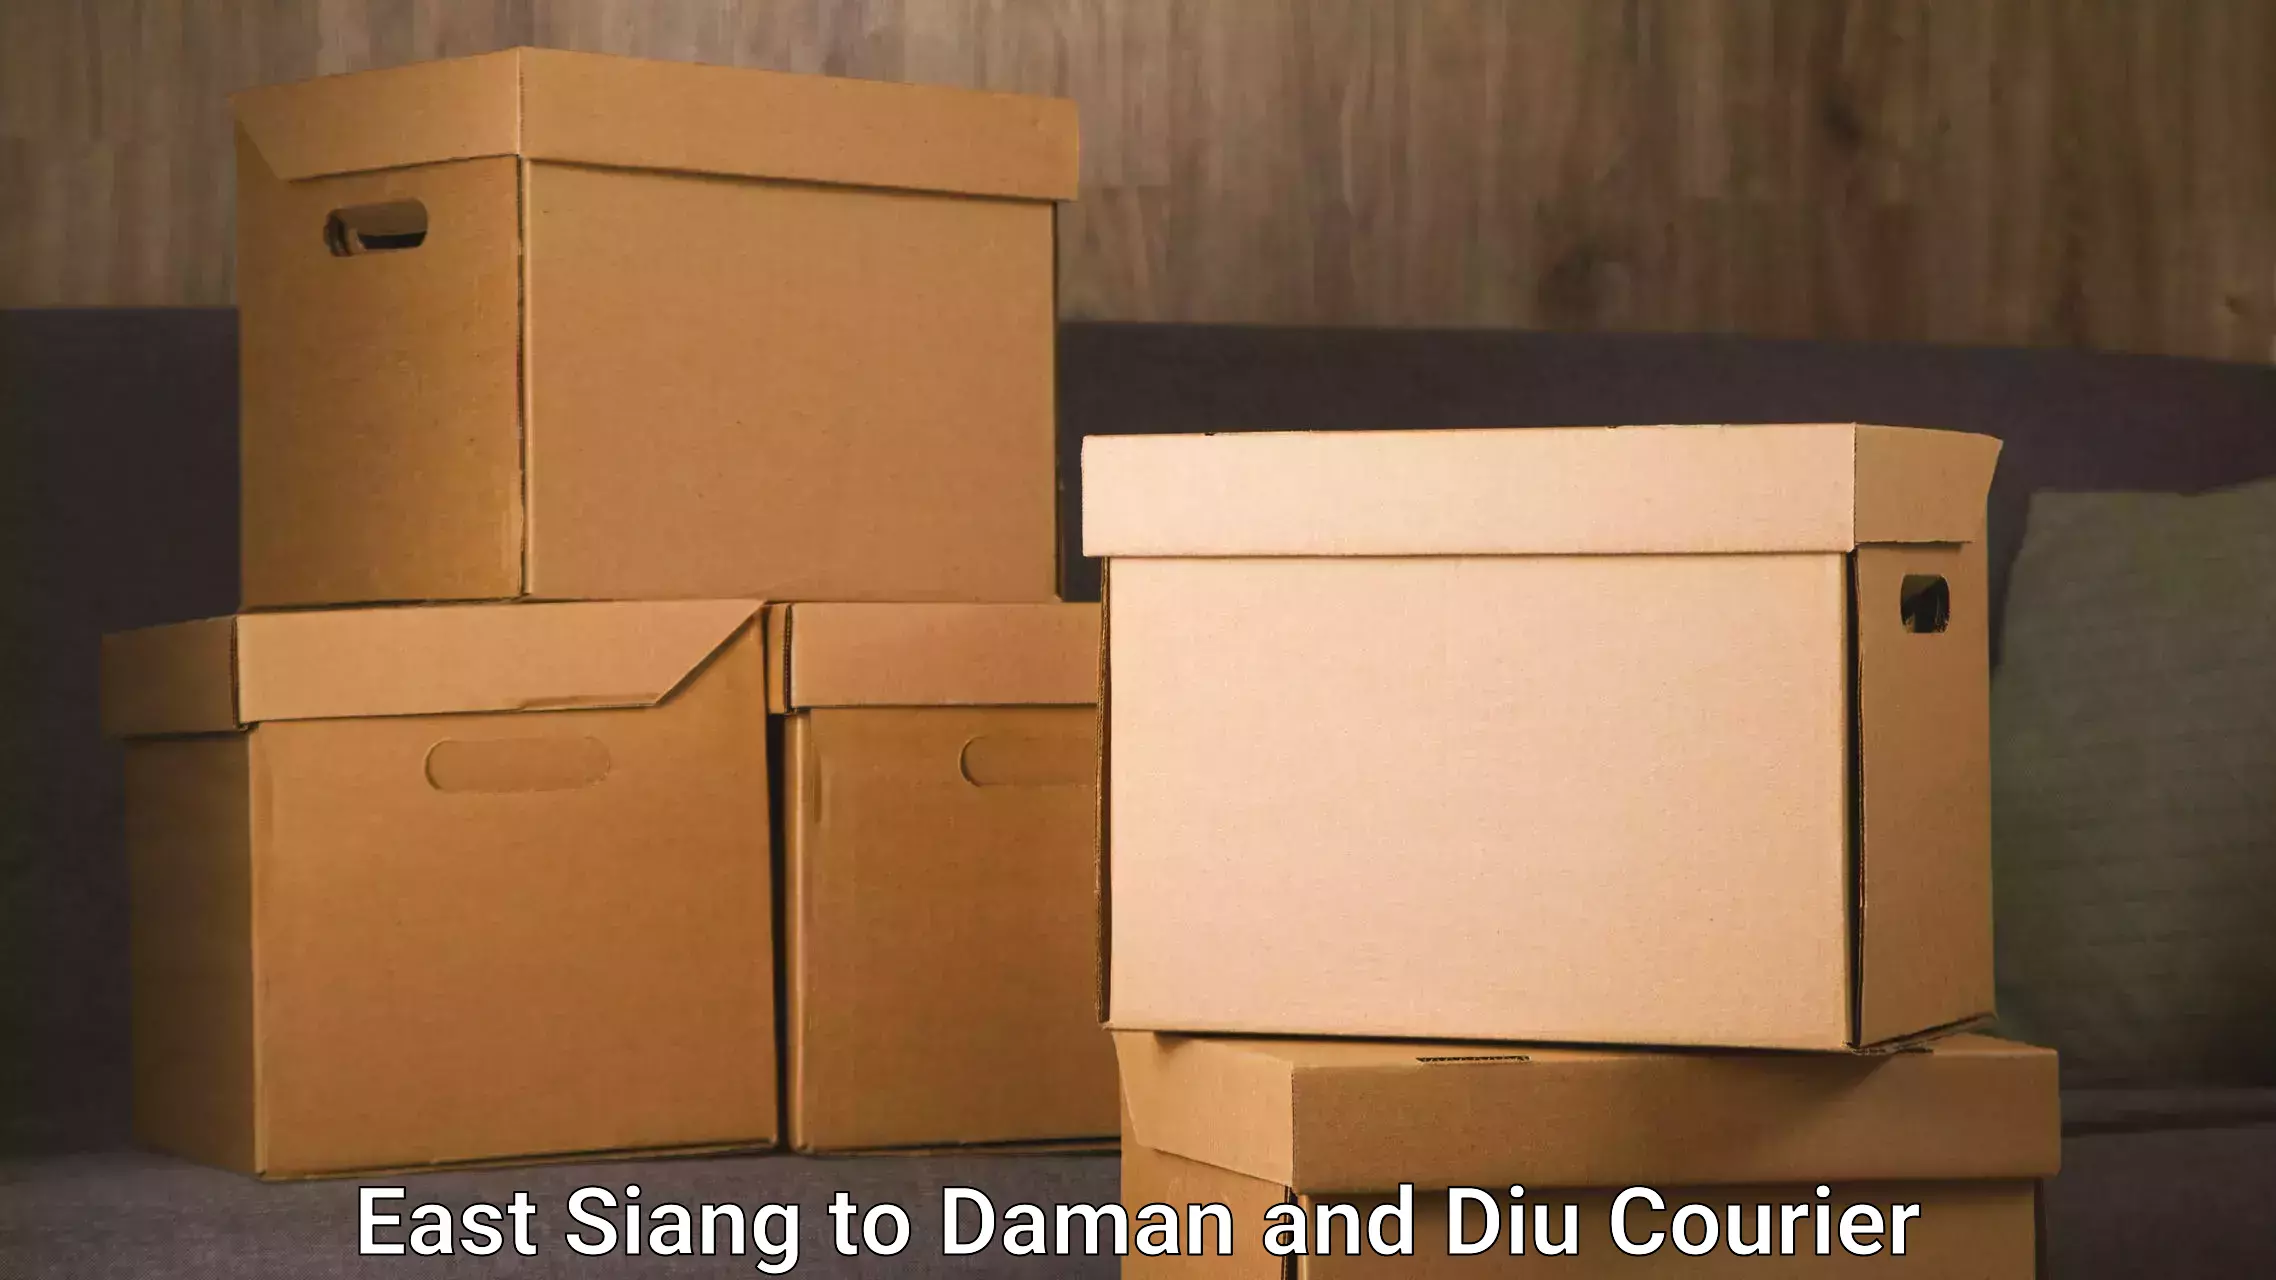 Easy access courier services East Siang to Diu